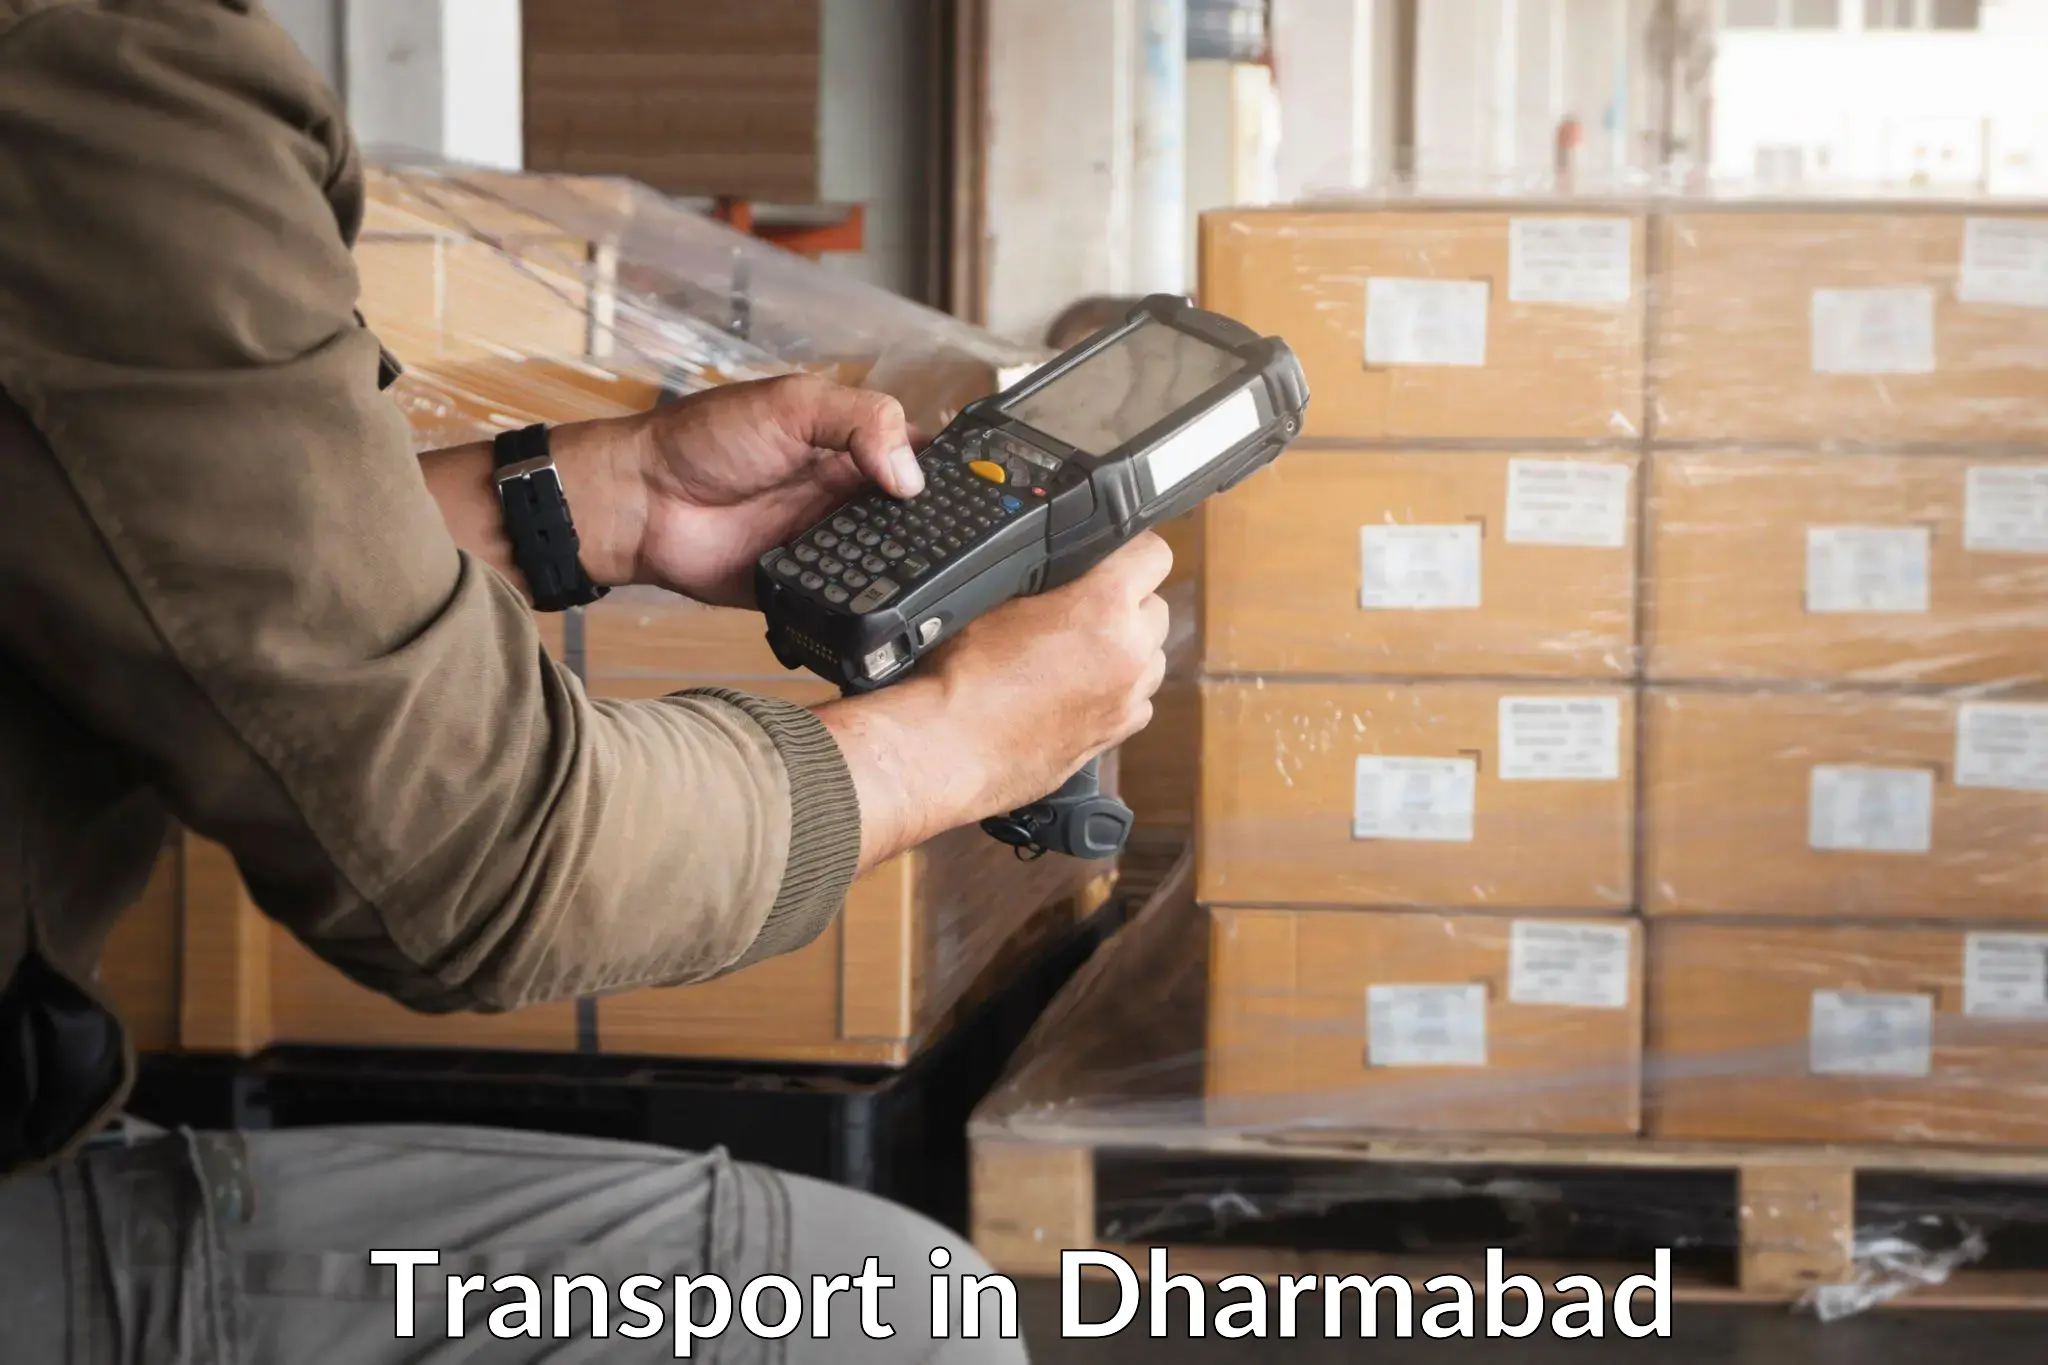 Shipping services in Dharmabad